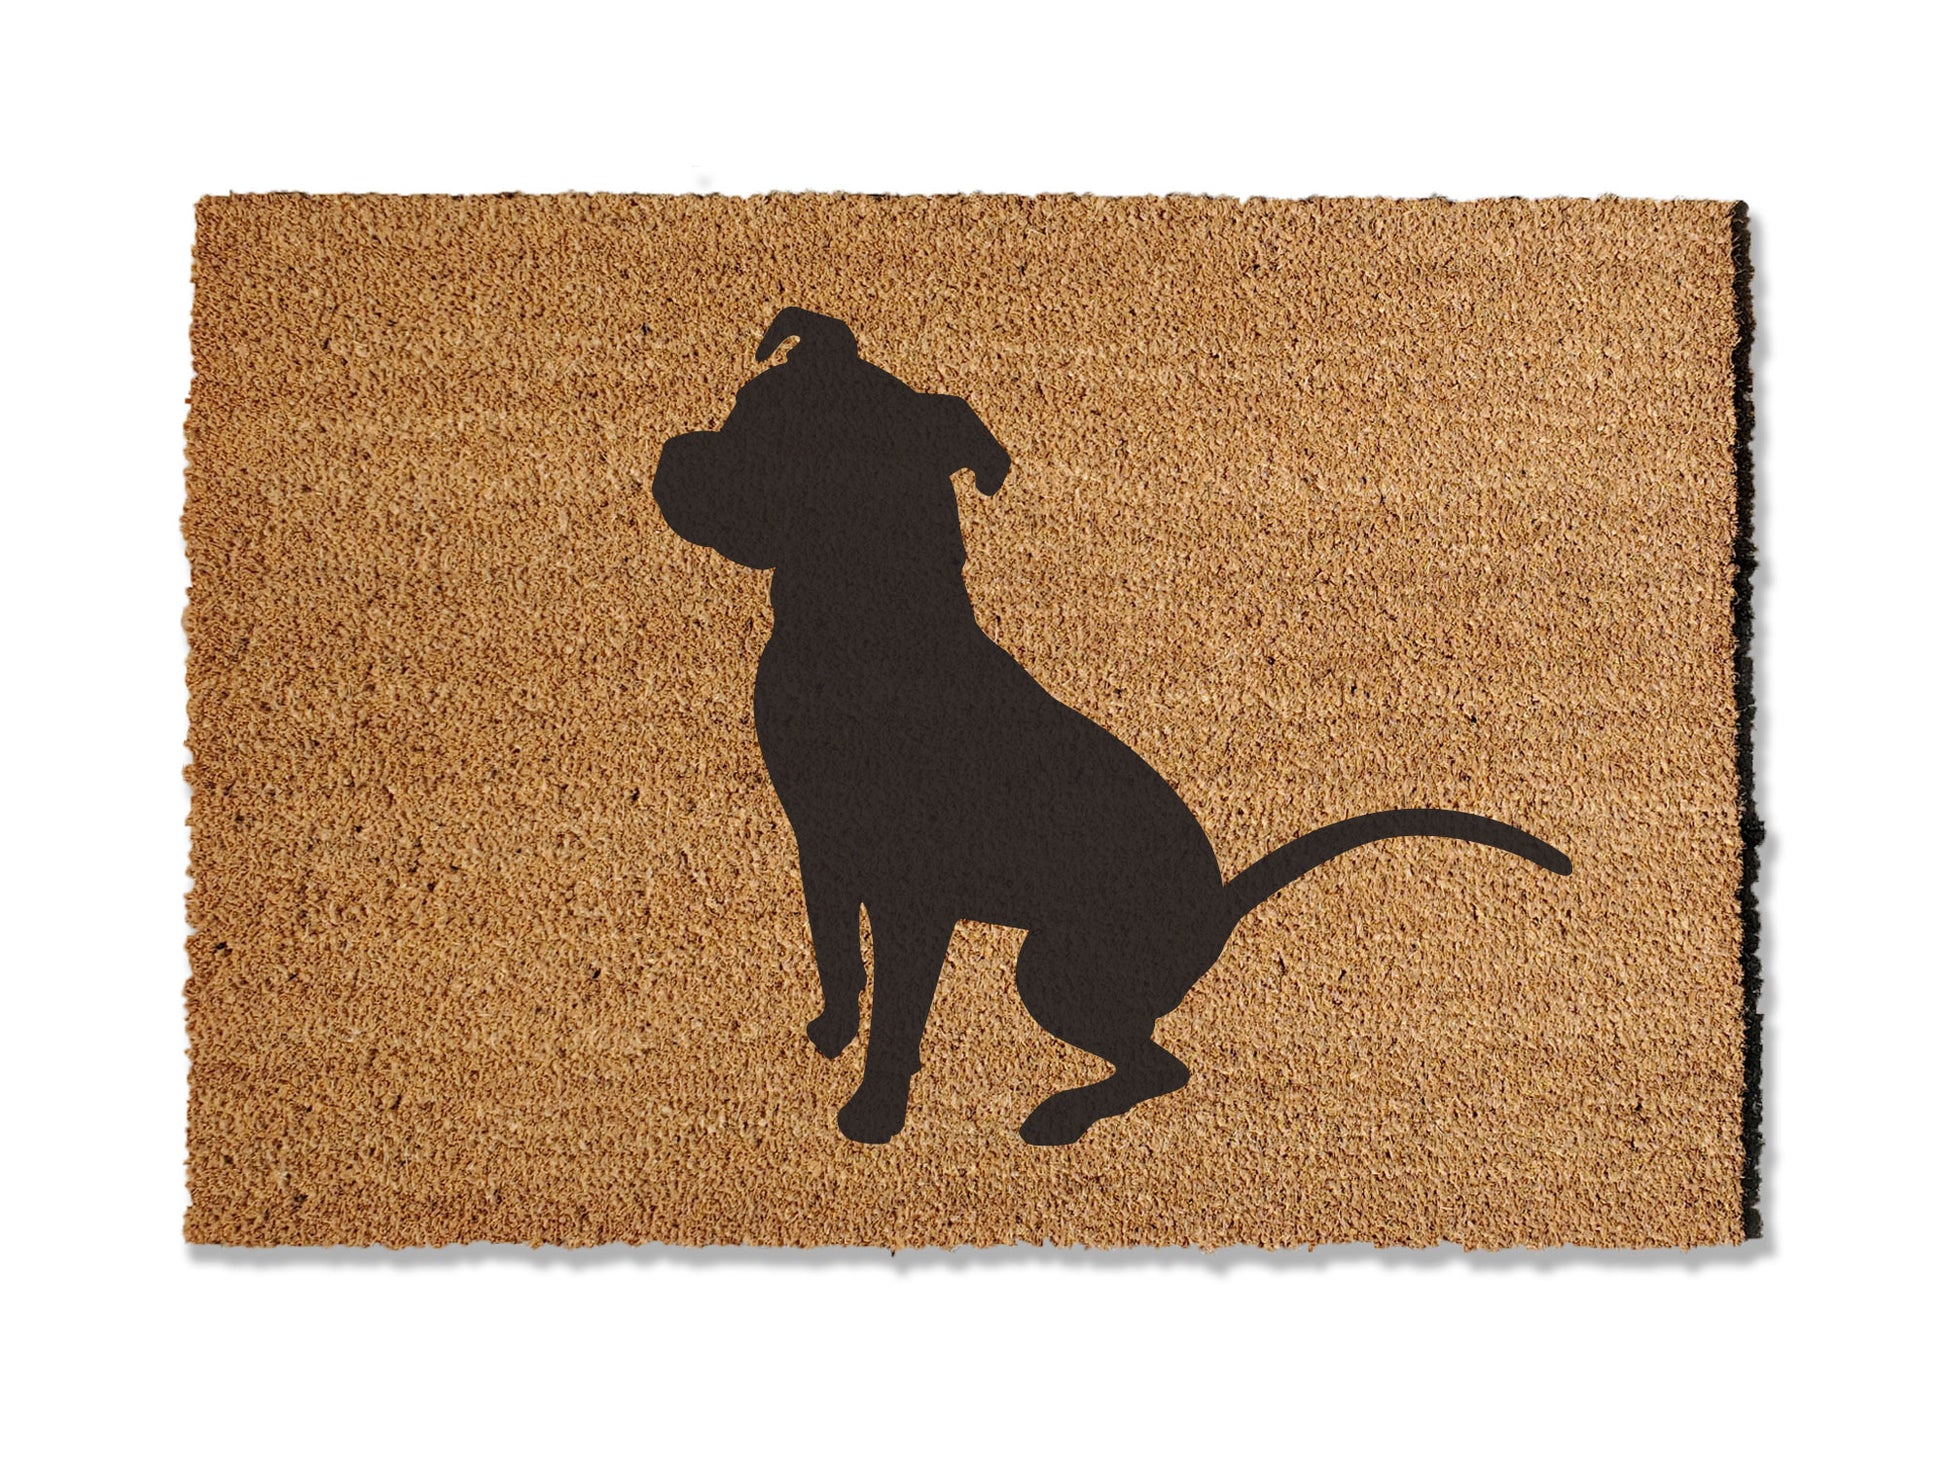 Coir doormat featuring an adorable pit bull design, ideal for dog lovers. This doormat is not only charming but also effective at trapping dirt. Available in multiple sizes to suit your entryway needs.